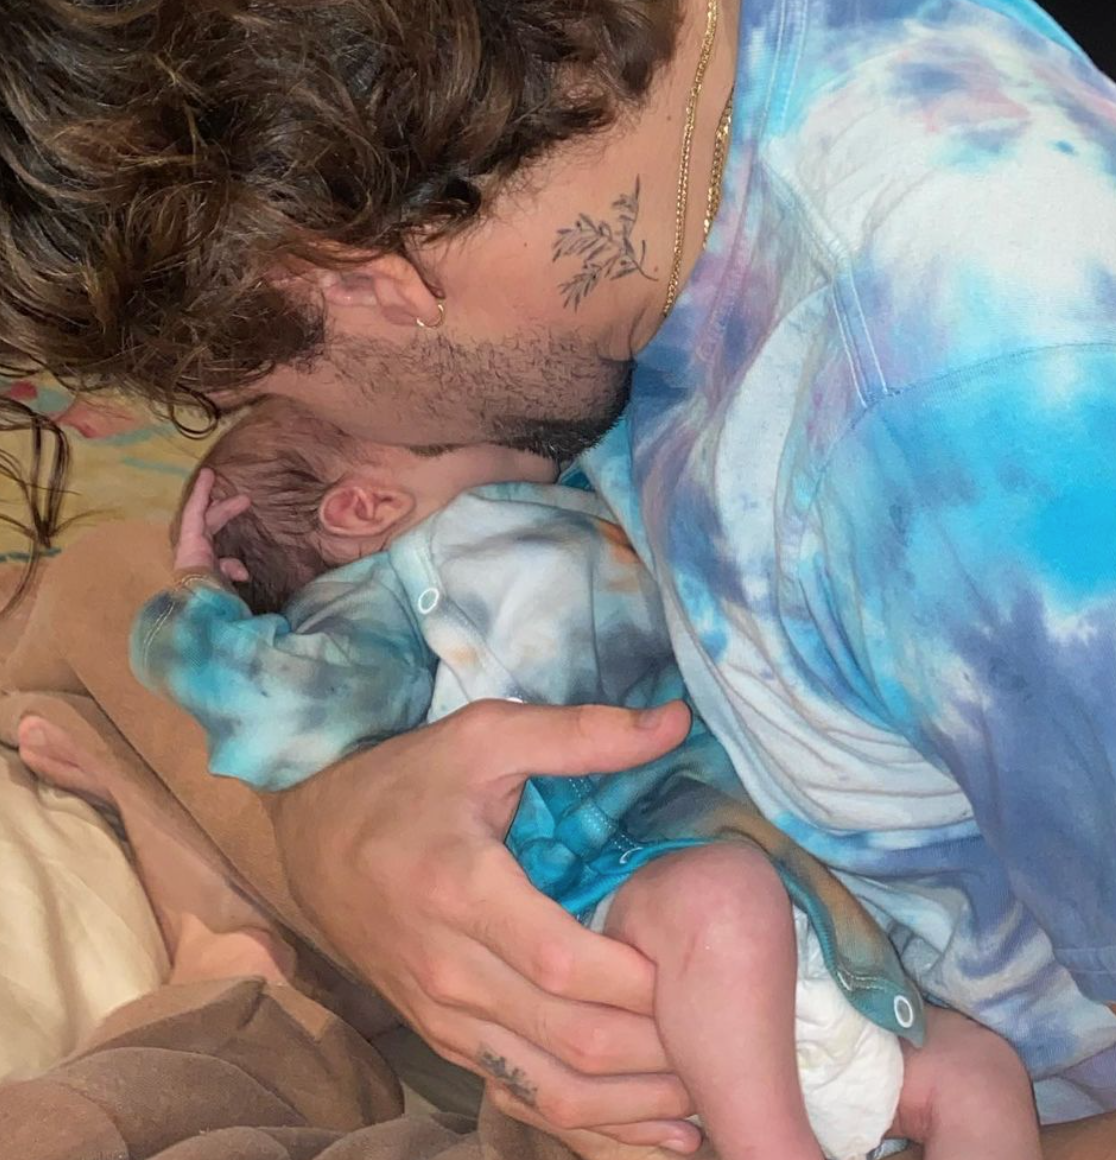 halsey's son is adorable: 10 photos the new parent shared of their baby boy